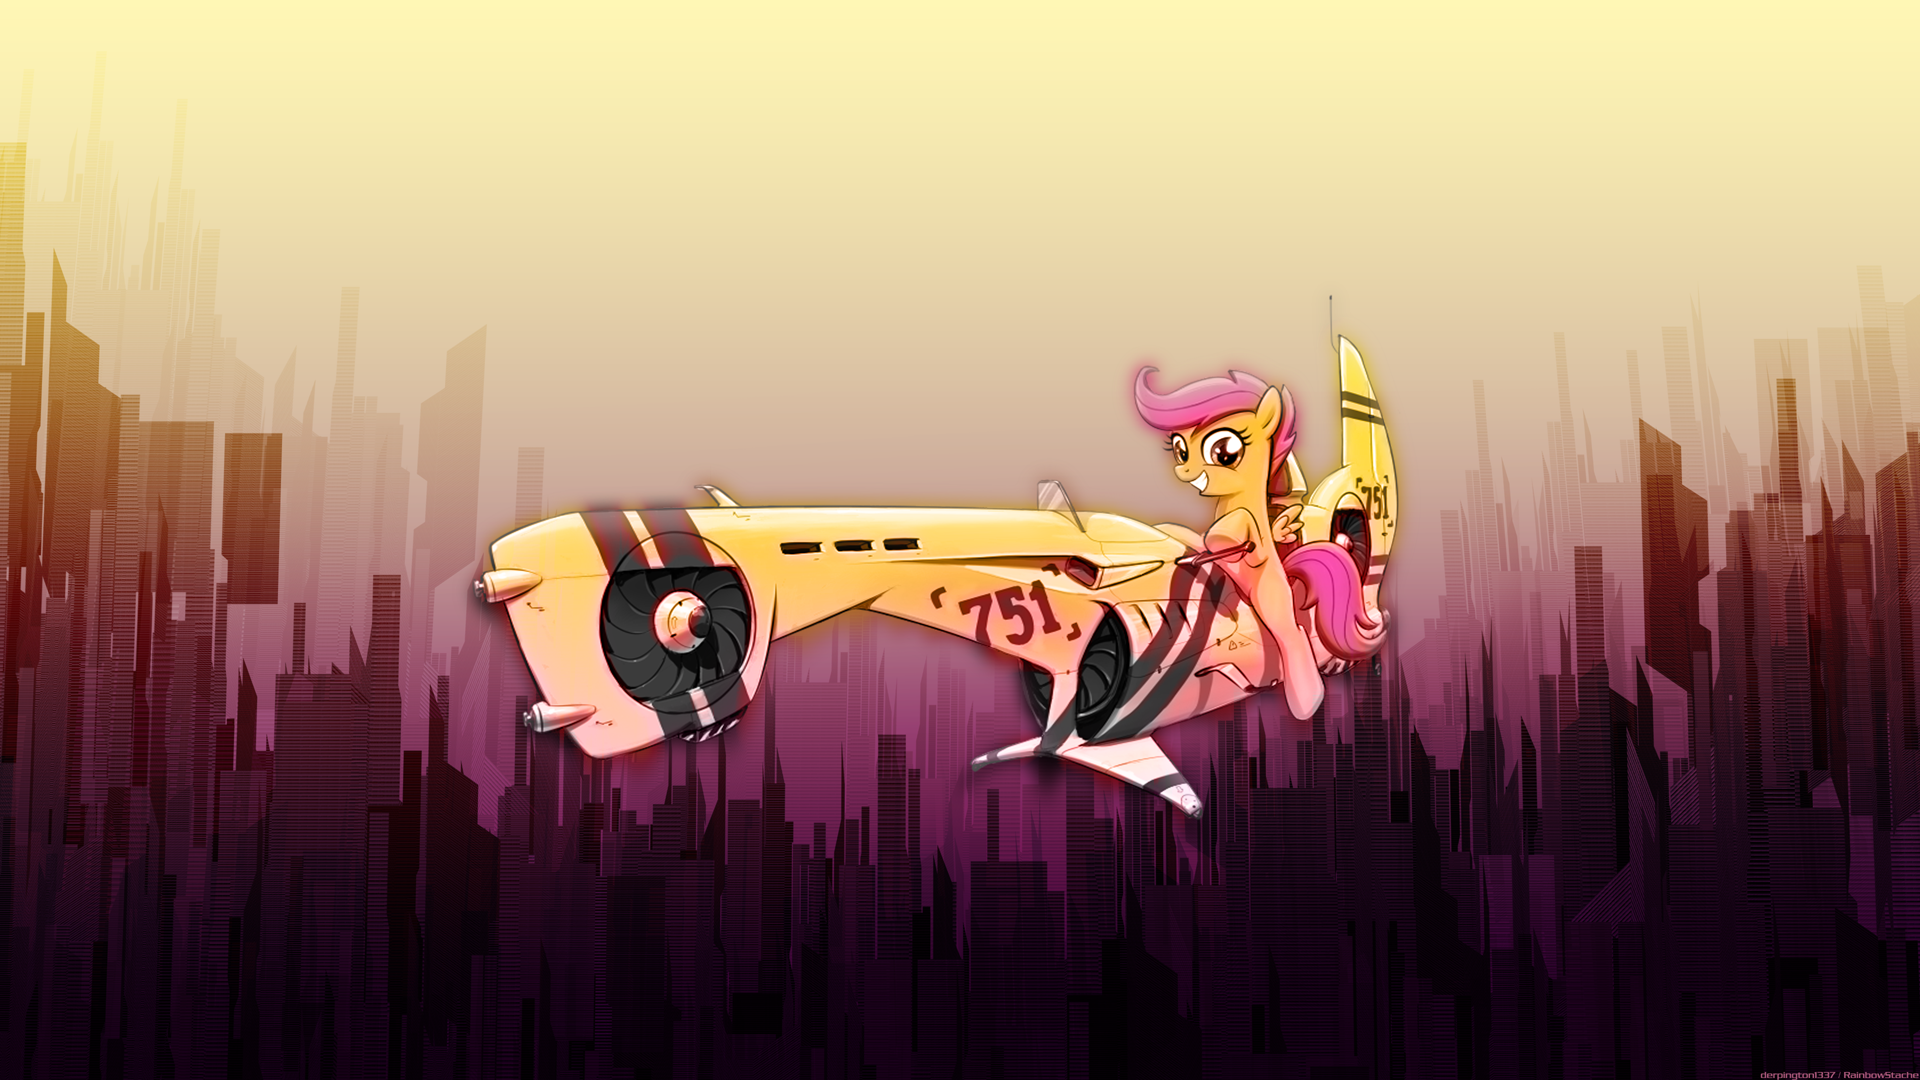 Scoots Cyber Scoot by averagedraw and derpington1337